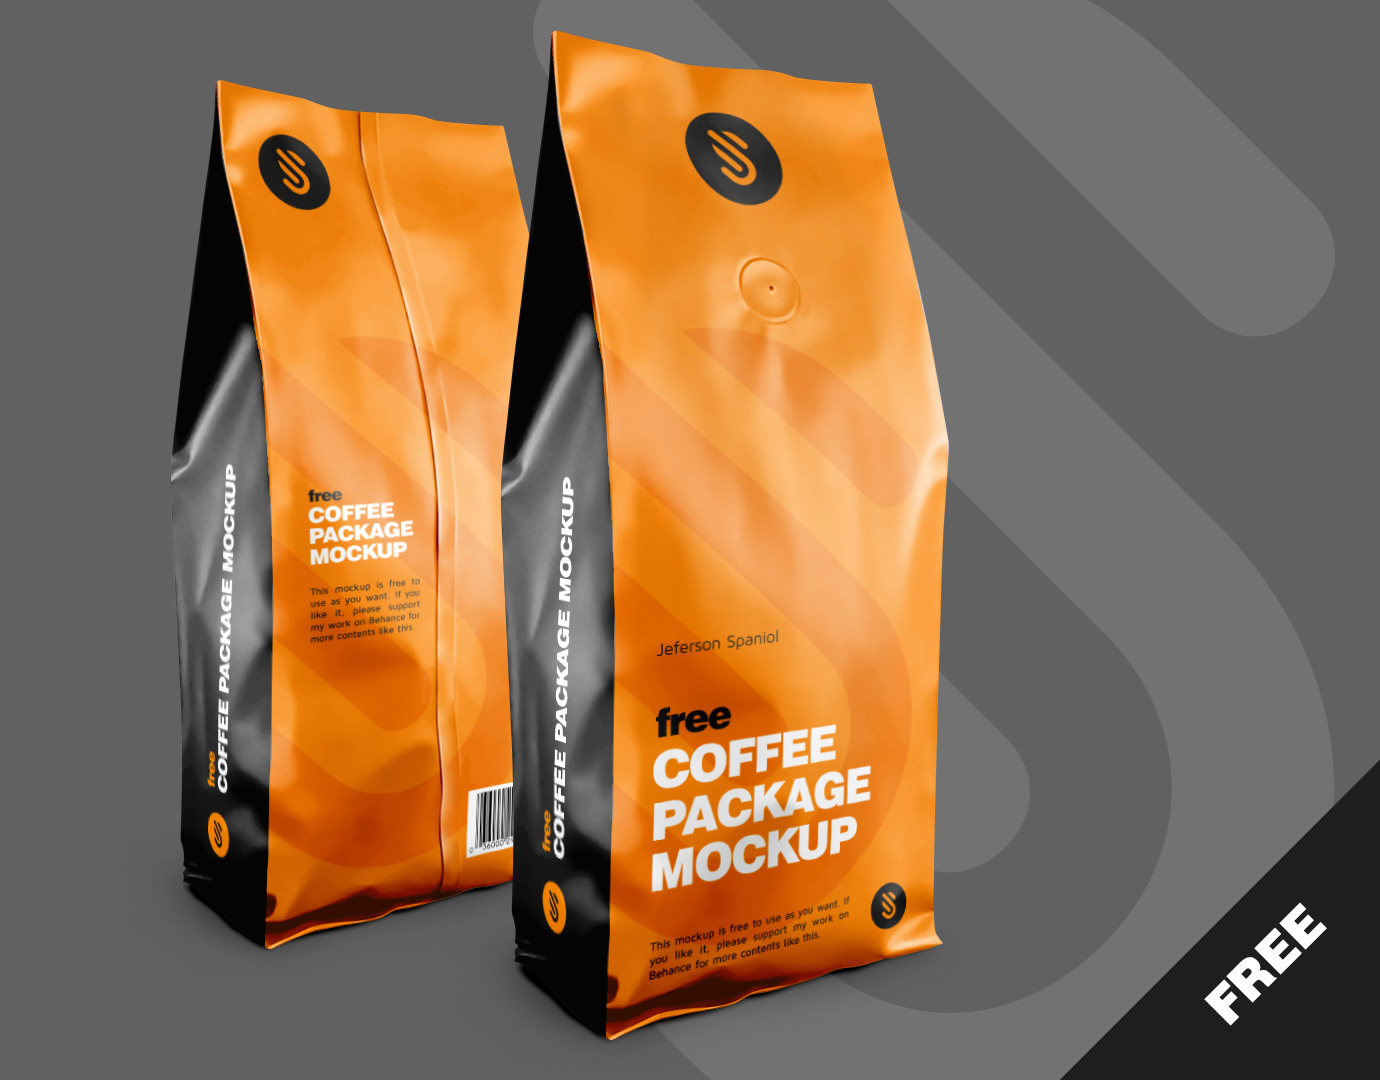 Package Mock Ups Projects Photos Videos Logos Illustrations And Branding On Behance